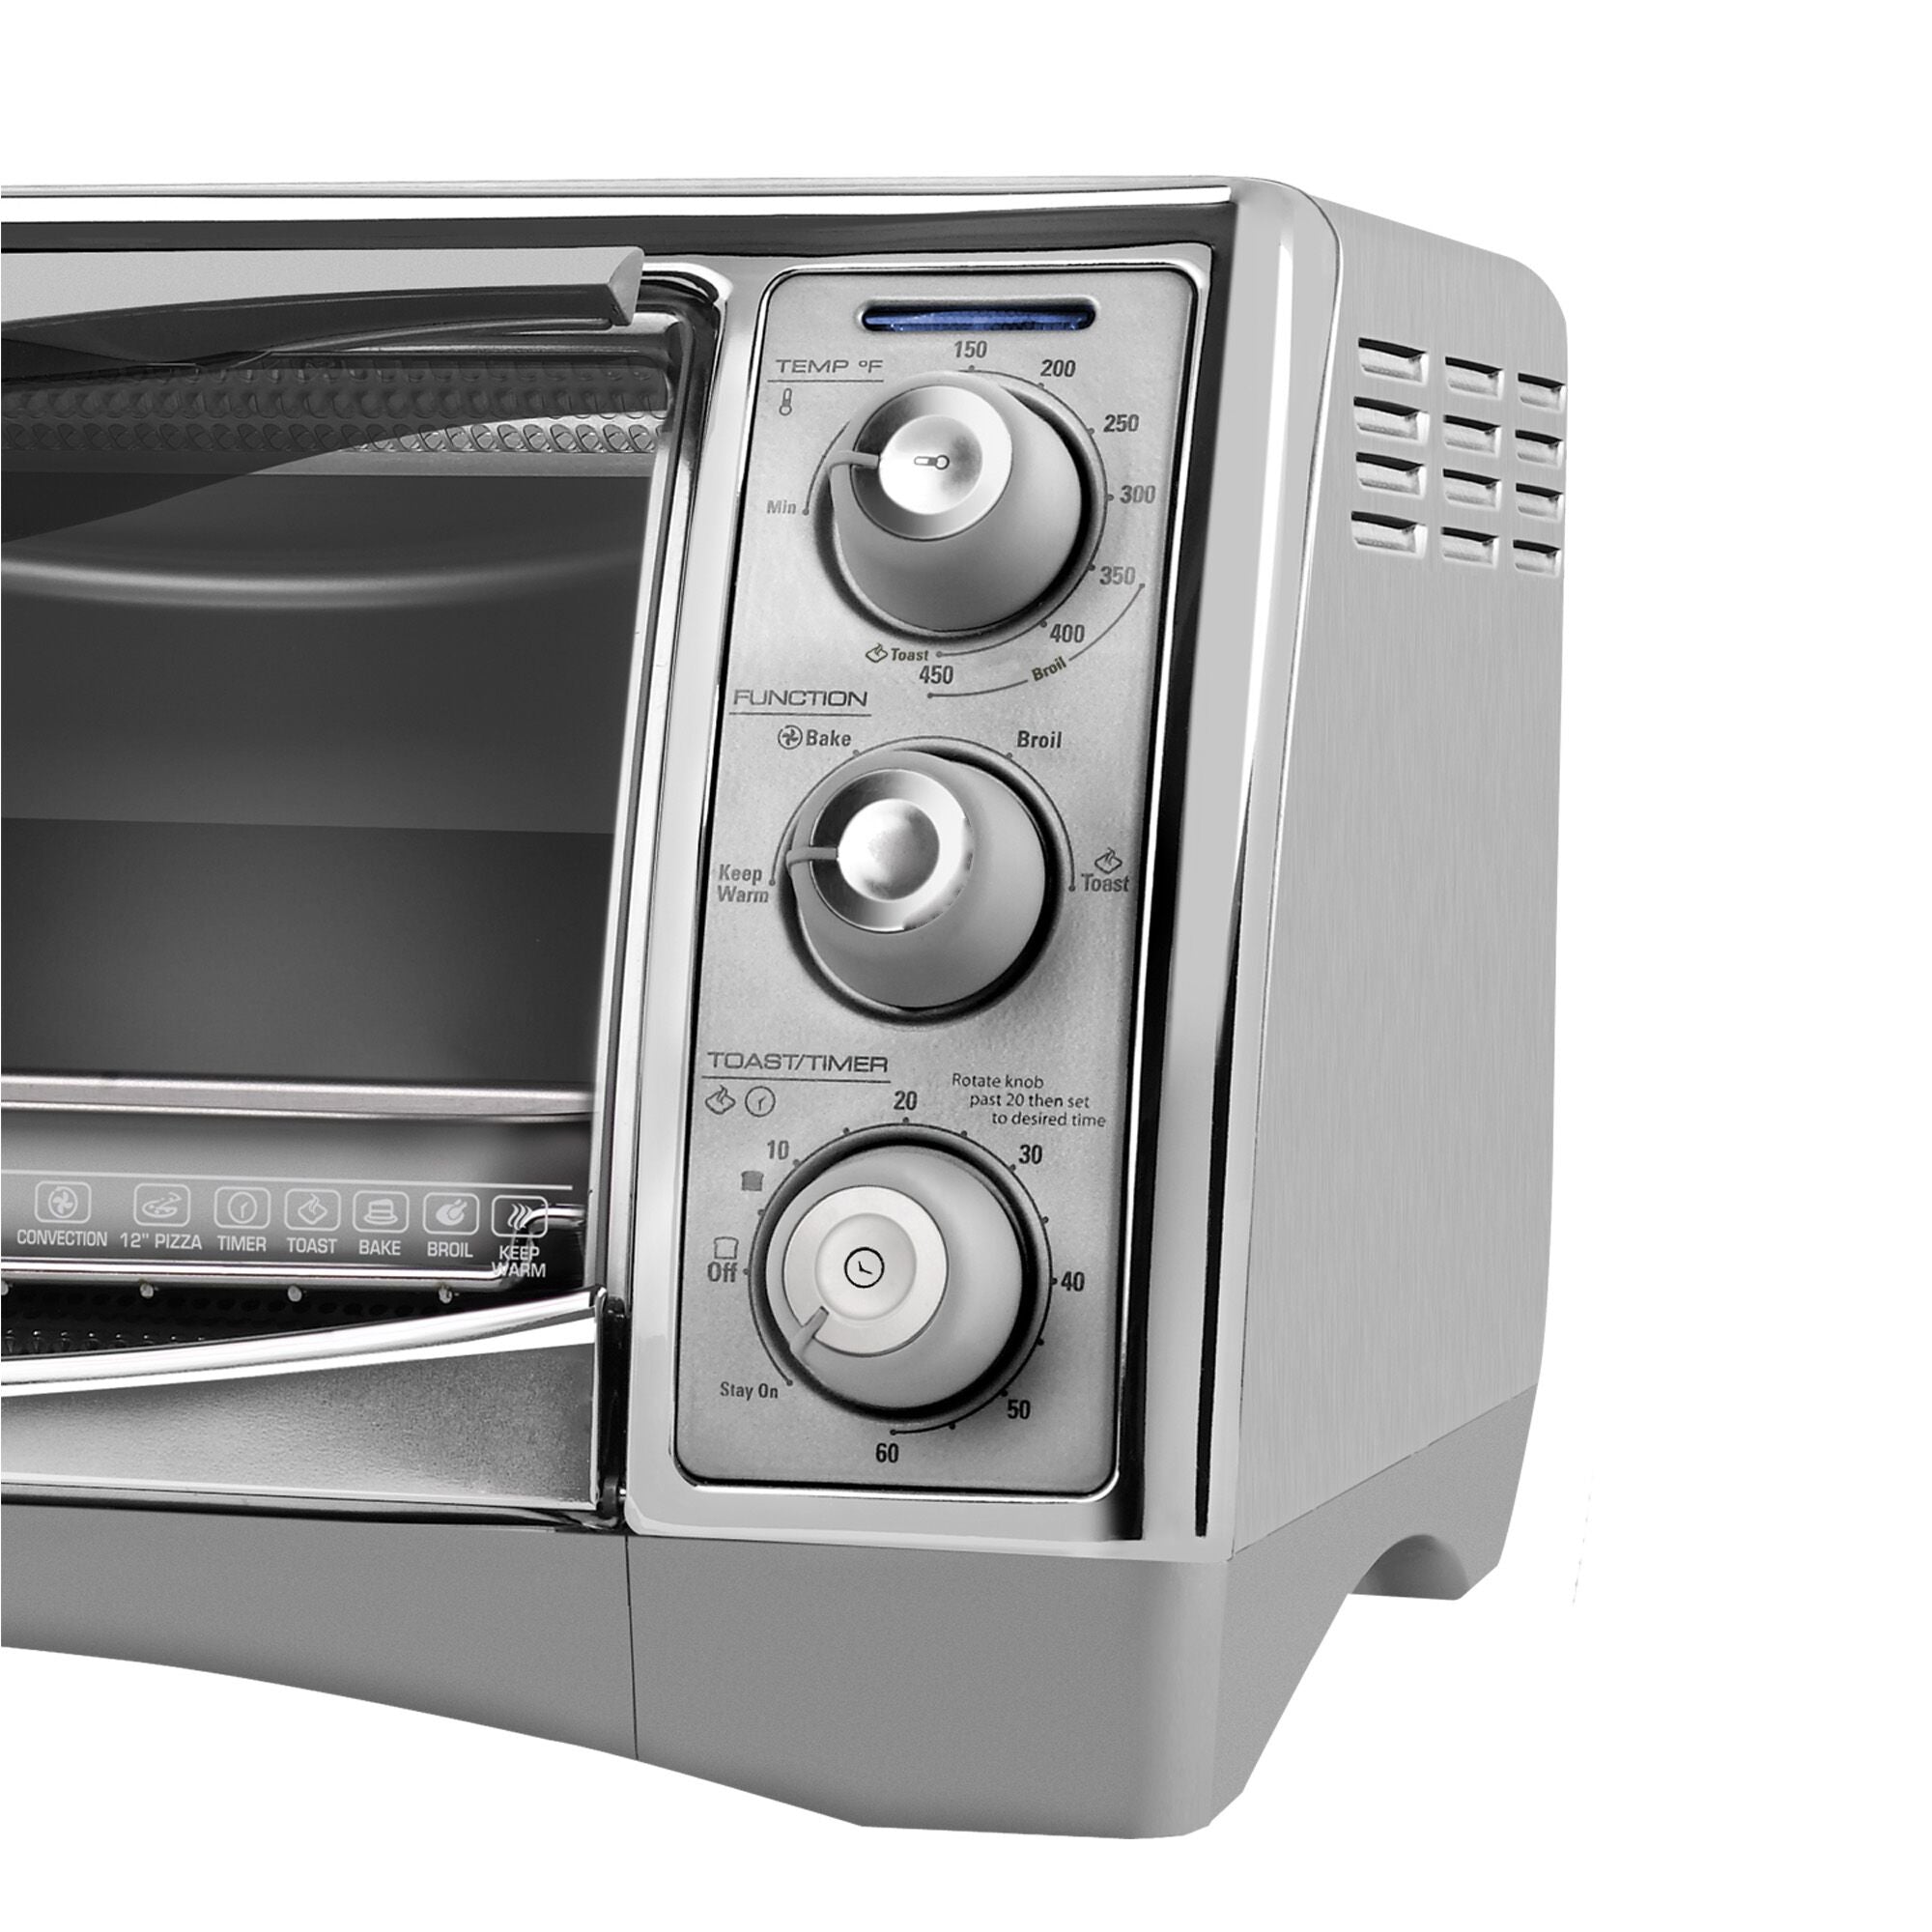 6 Slice countertop convection toaster oven.